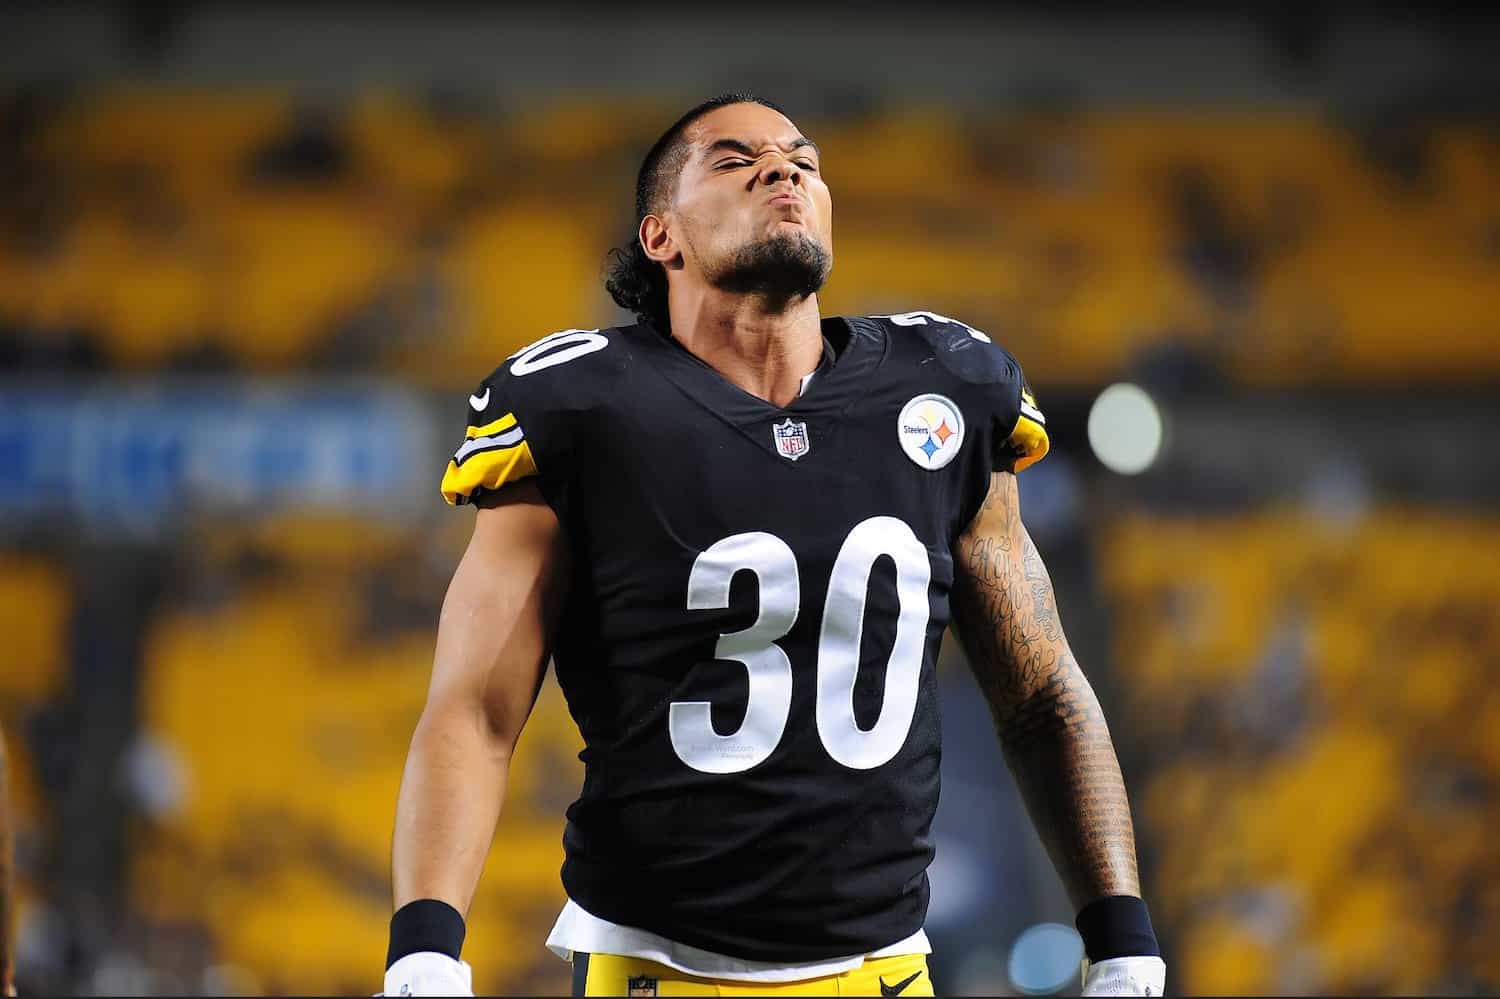 Pittsburgh Steelers Running Back James Conner. Photo Credit: Brook Ward | Under Creative Commons License